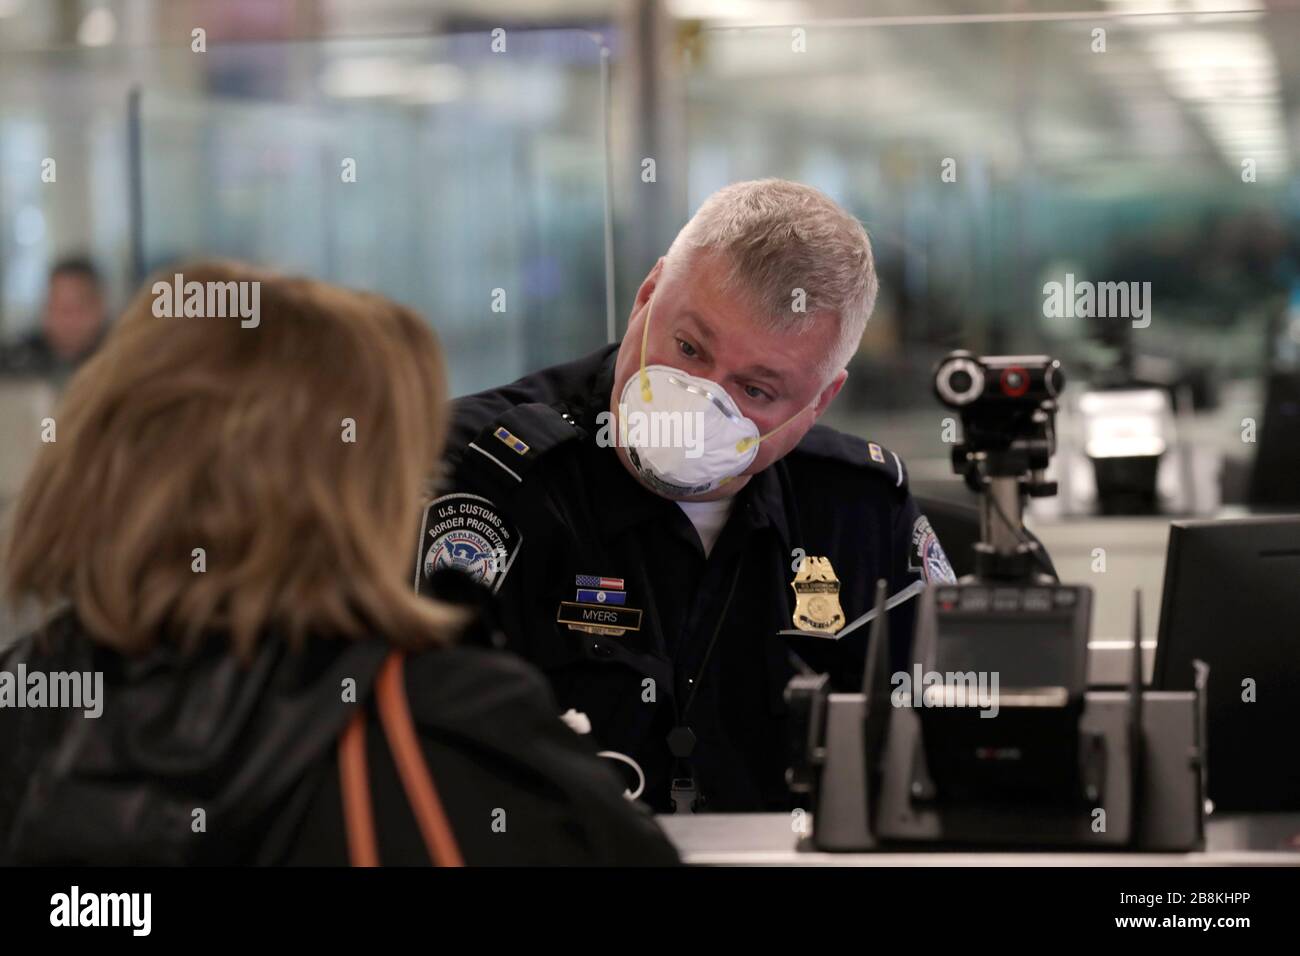 U.S. Customs and Border Protection officers screen international passengers arriving at Dulles International Airport wearing personal protective equipment March 13, 2020 in Dulles, Virginia. In response to the COVID-19, coronavirus pandemic CBP officers and travelers have begun wearing gloves and masks as protection from viral exposure. Stock Photo